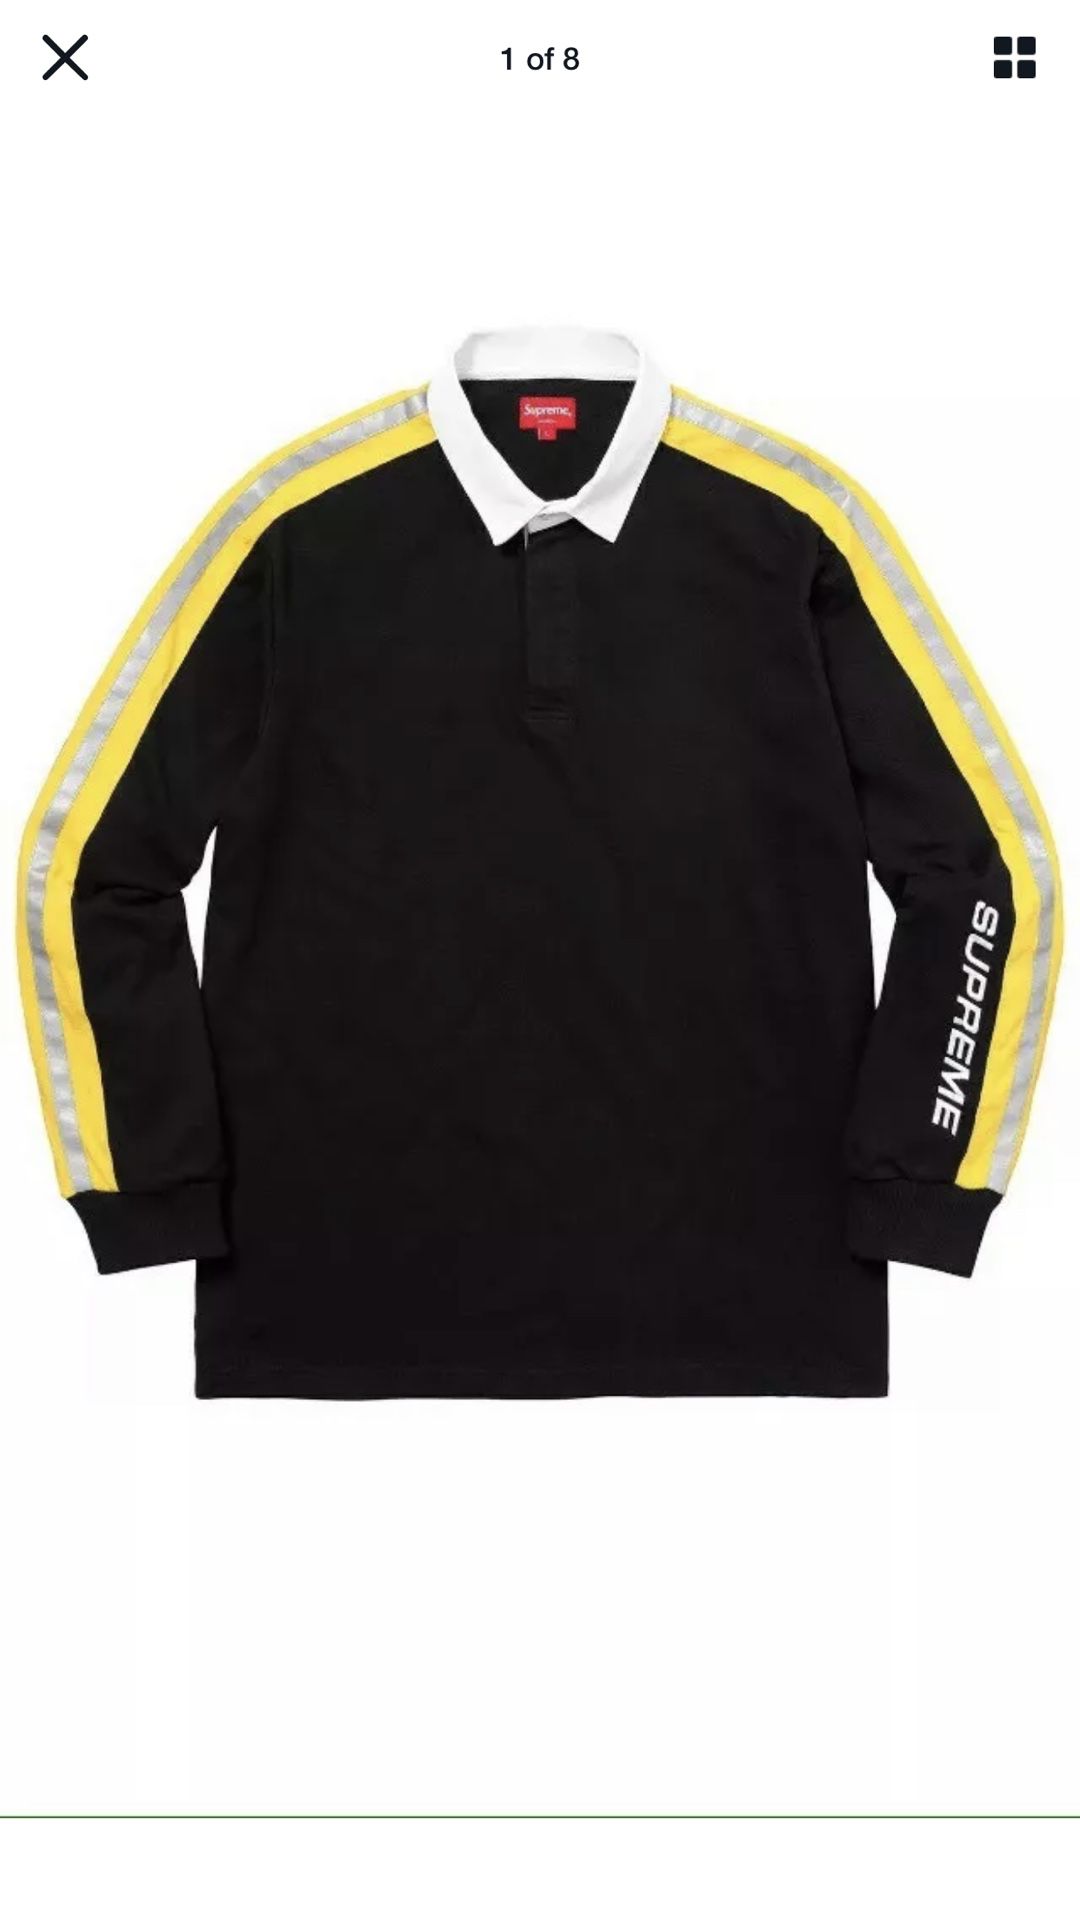 Supreme brand new sweatshirt reflective sleeve, striped rugby black and yellow, size small